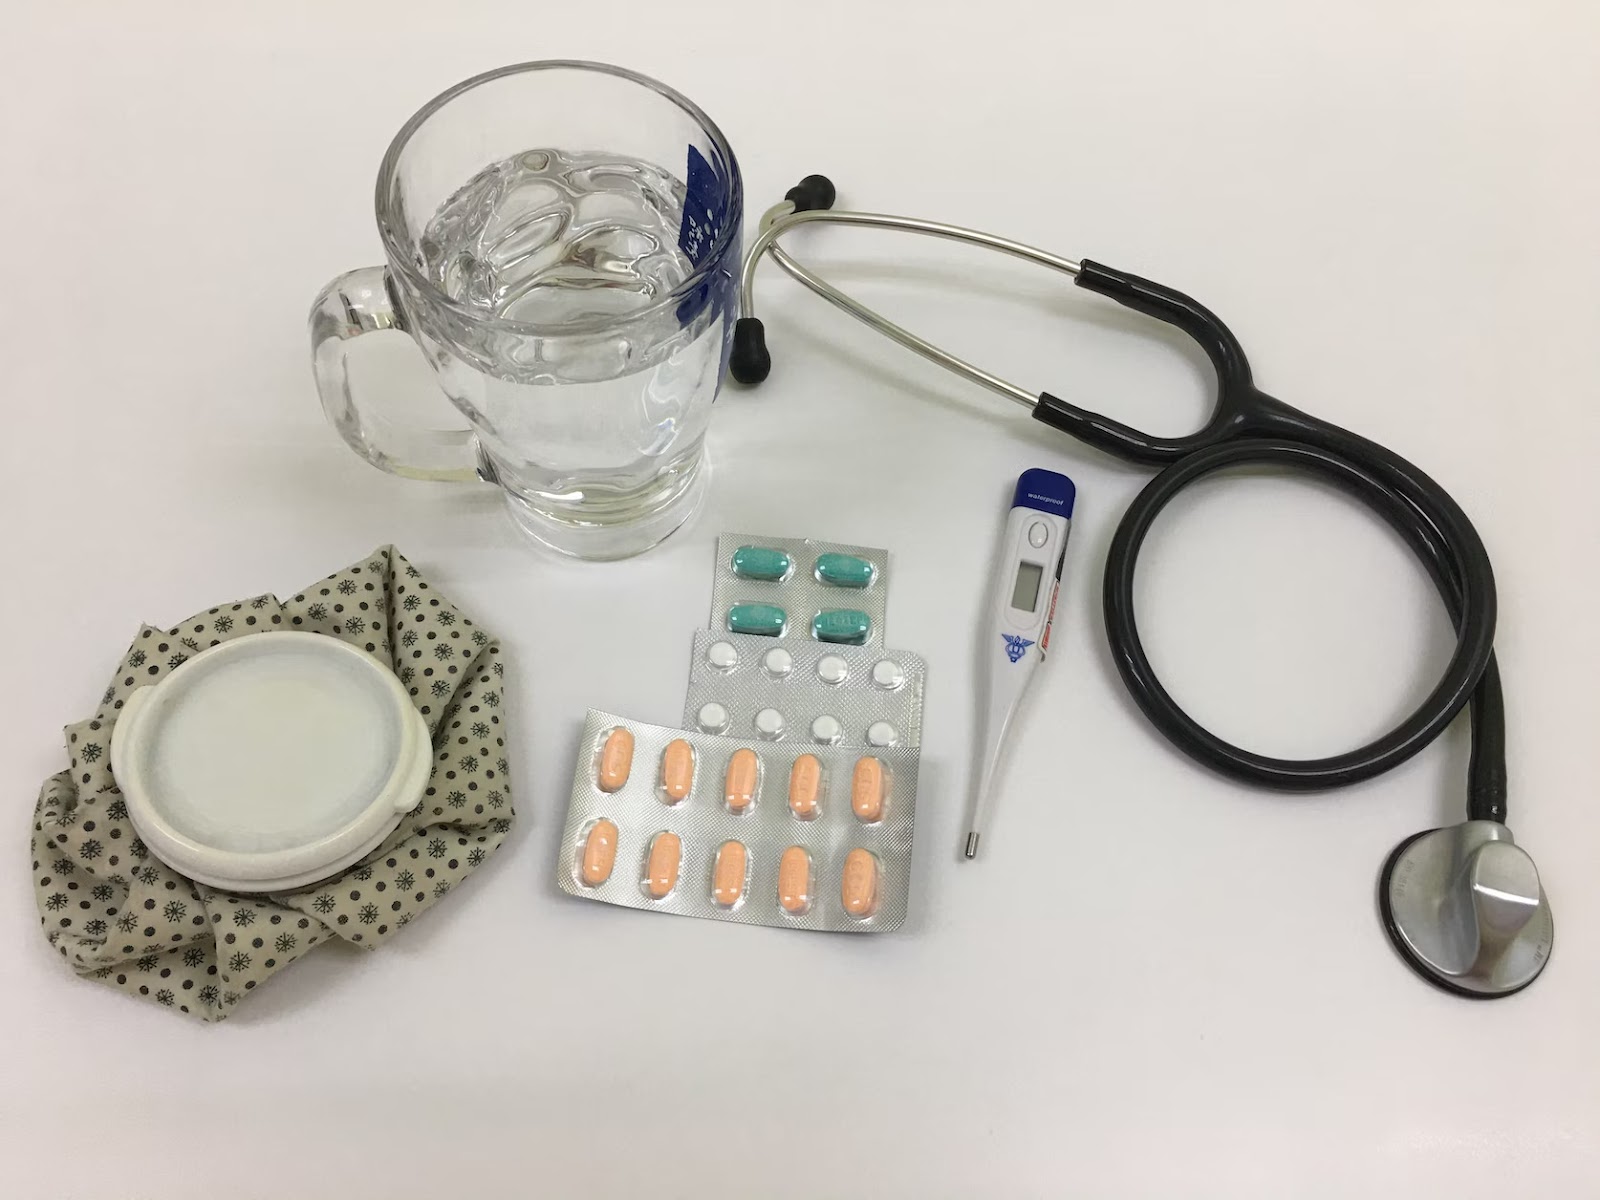 Medicines, thermometer, stethoscope and icebag - Autumn Allergies